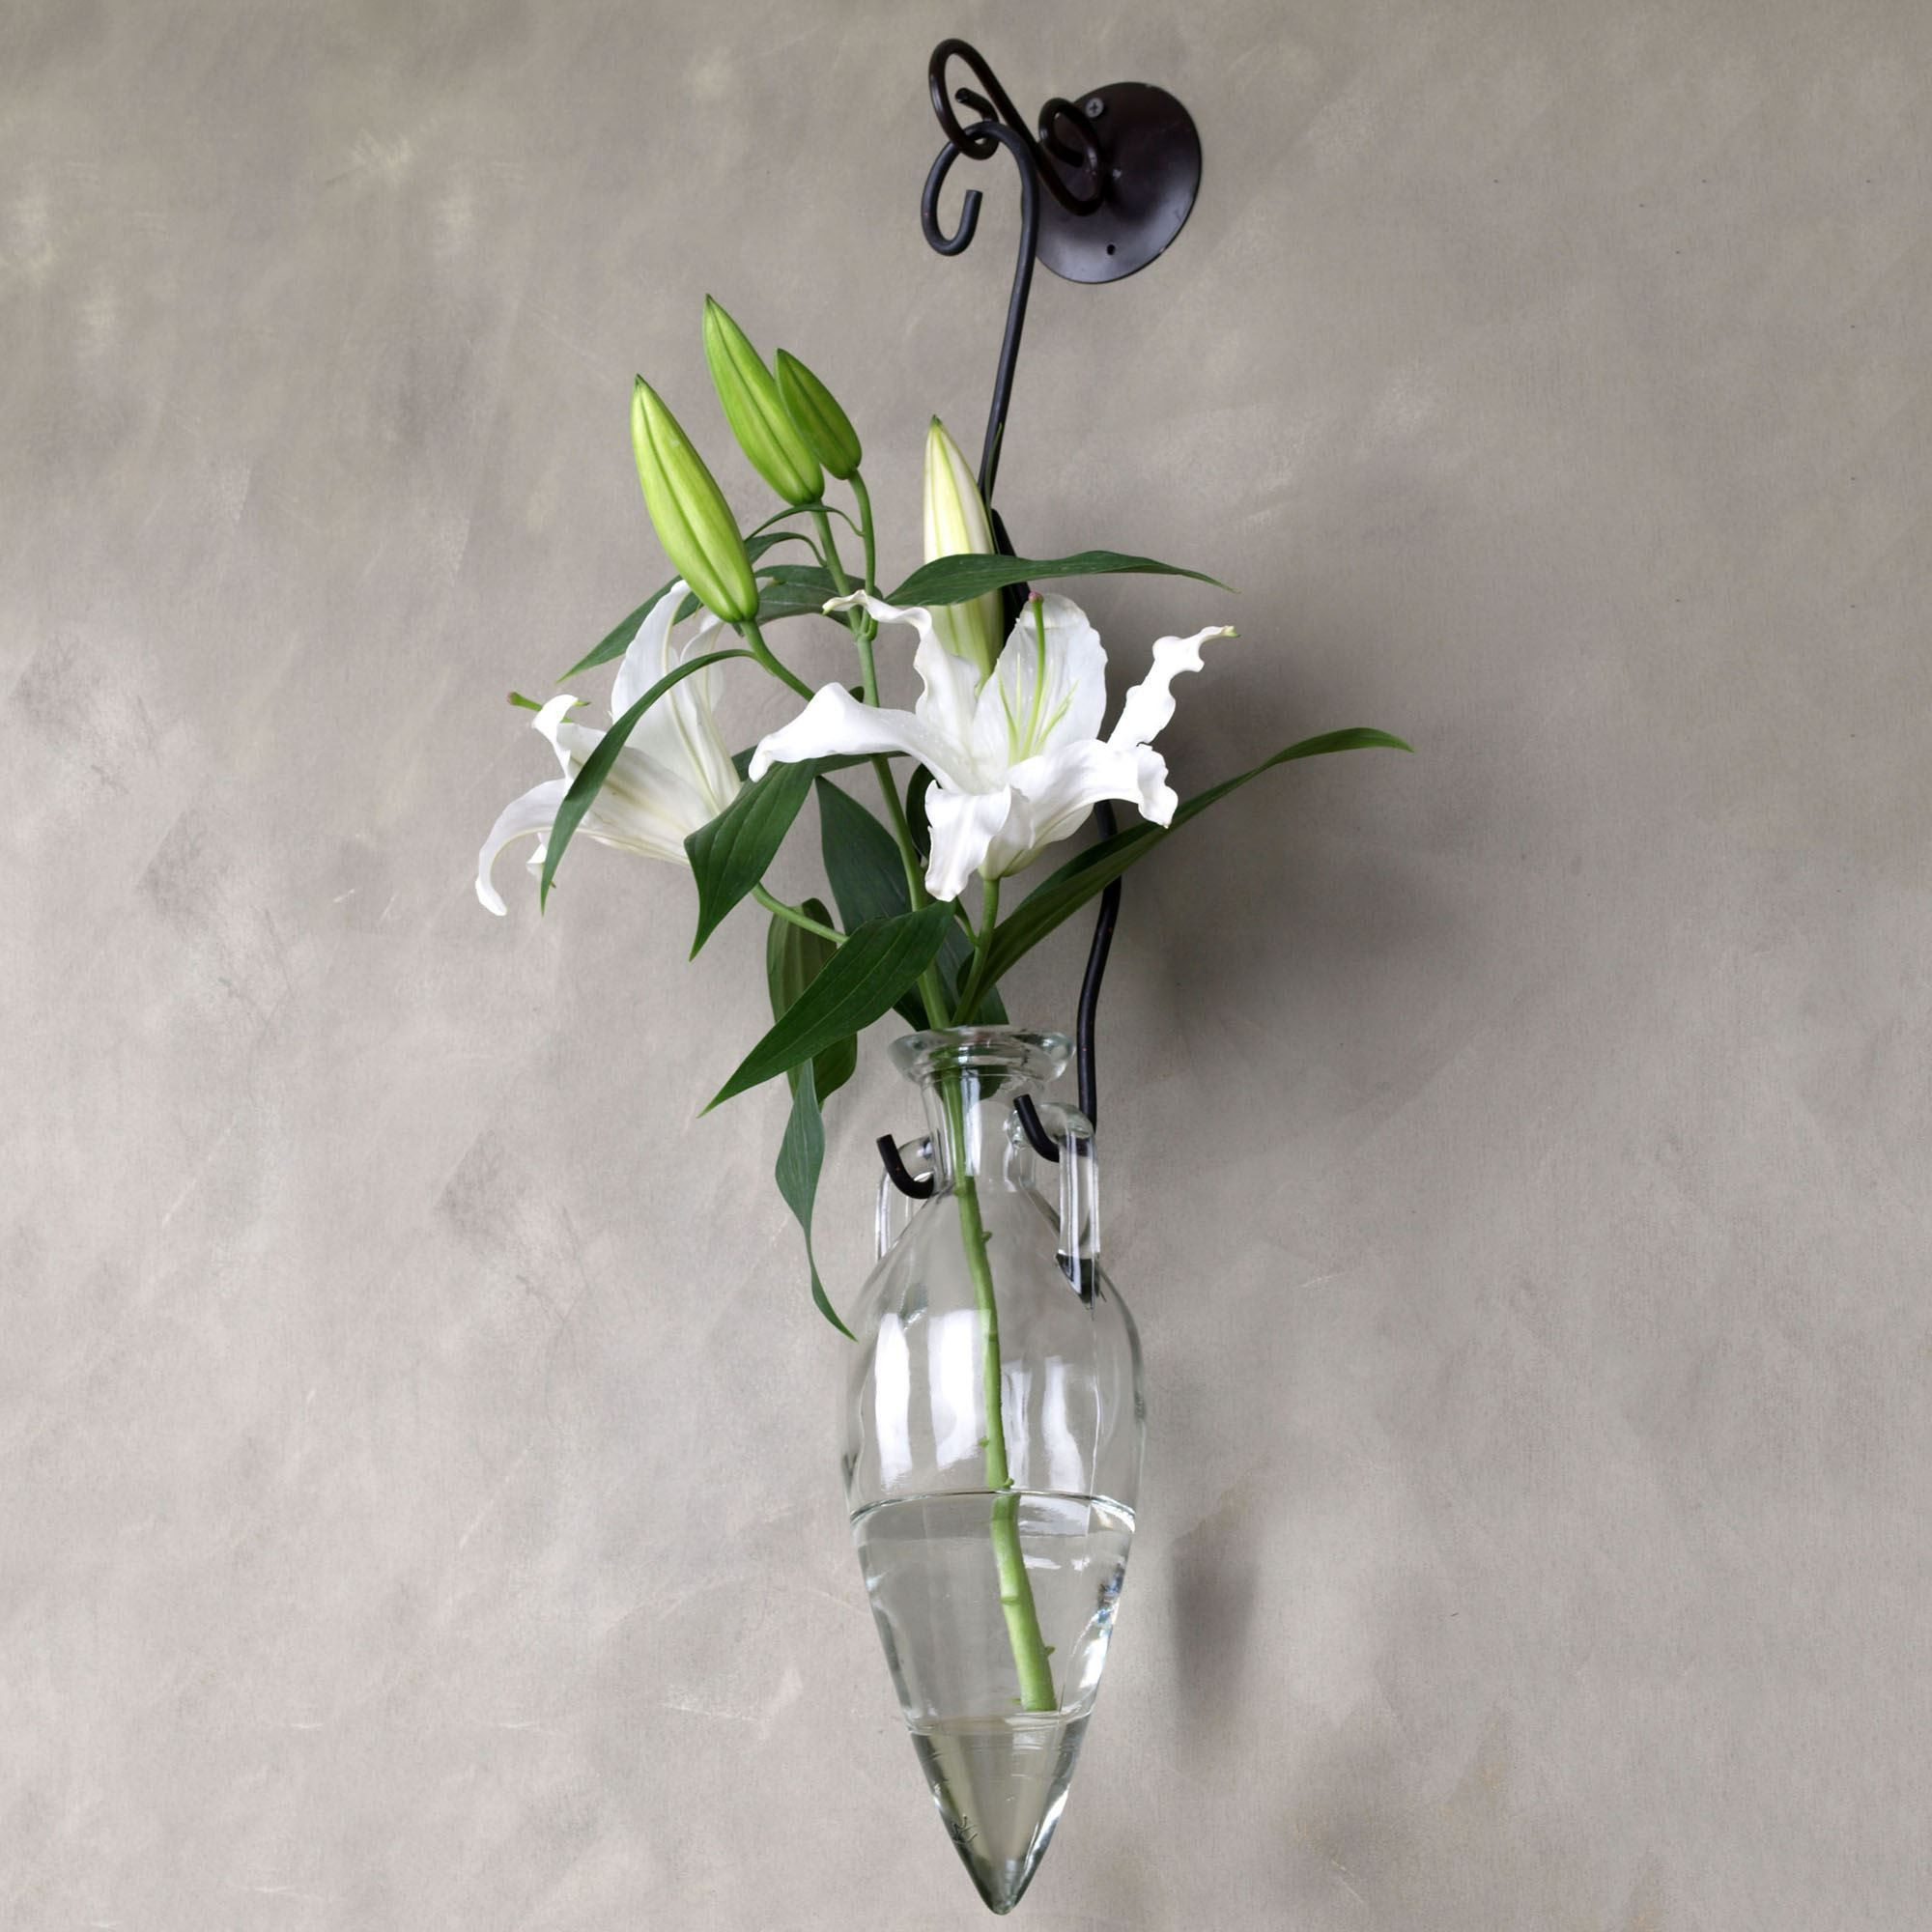 13 attractive White Floor Vase with Flowers 2023 free download white floor vase with flowers of 30 copper flower vase the weekly world pertaining to 33 inspirational silver vase decor h vases wall hanging flower